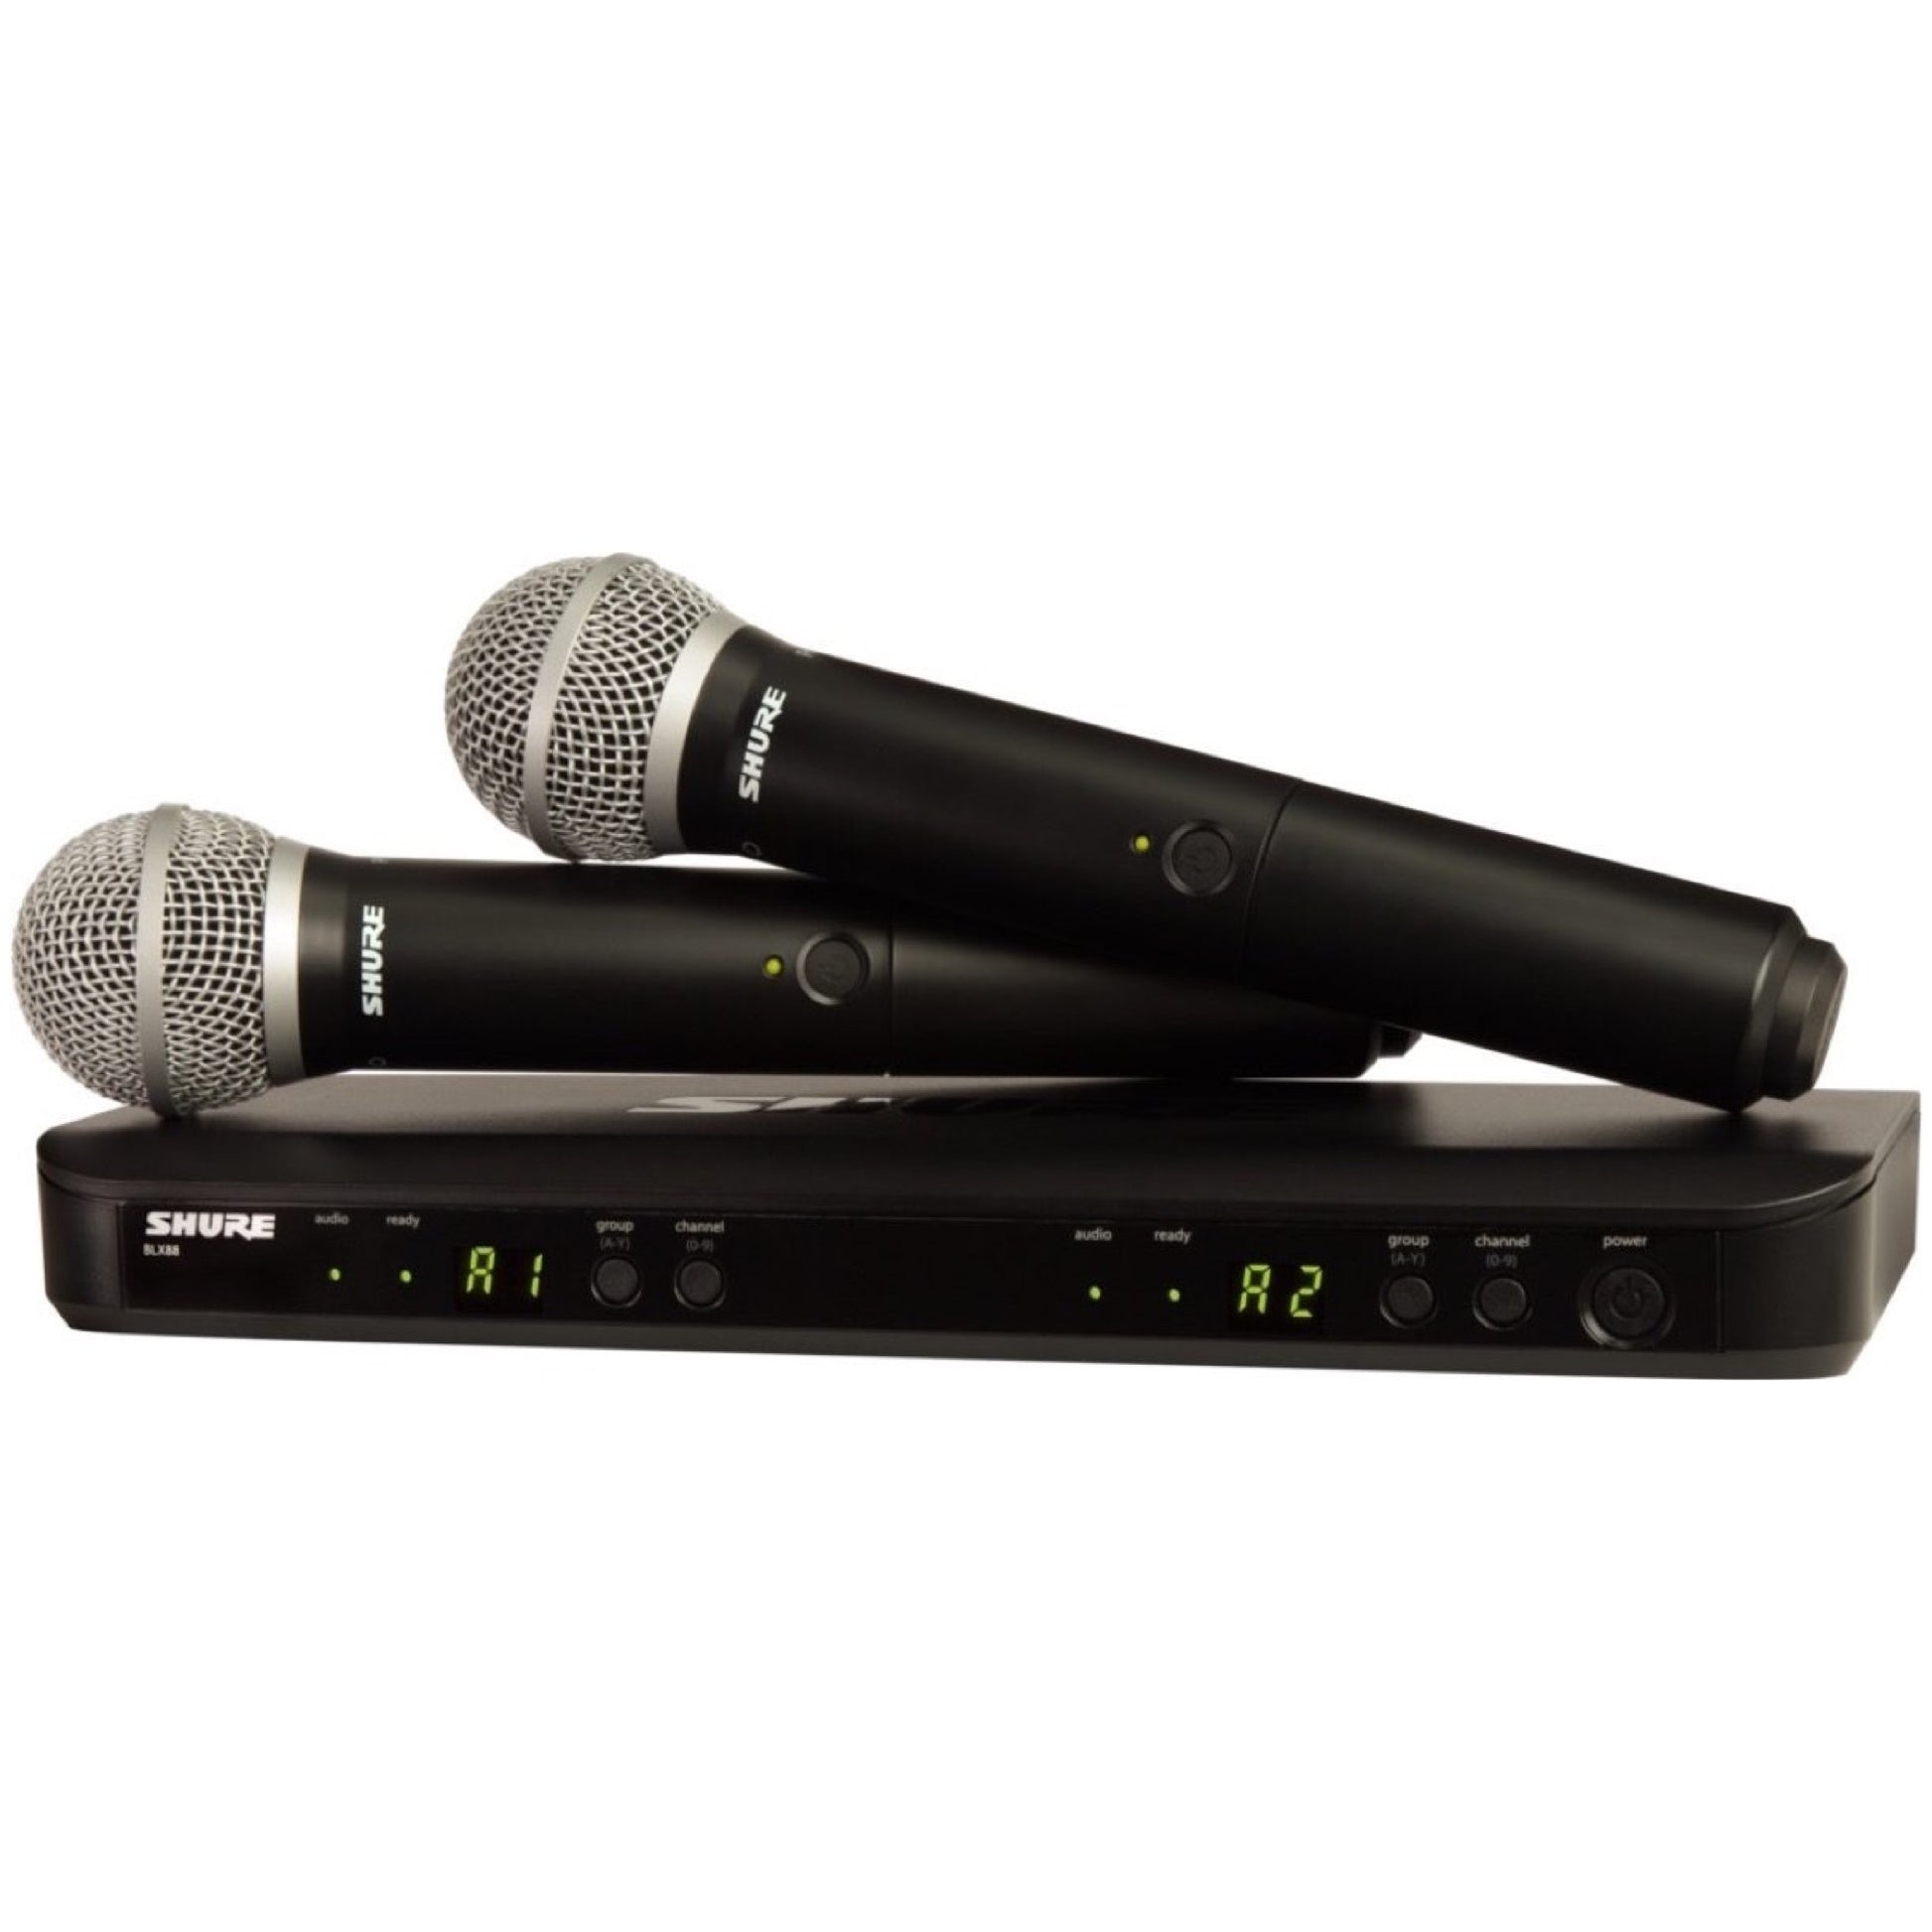 Shure BLX288/SM58 Dual Channel SM58 Wireless Handheld Microphone System, Band H9 (512-542 MHz)